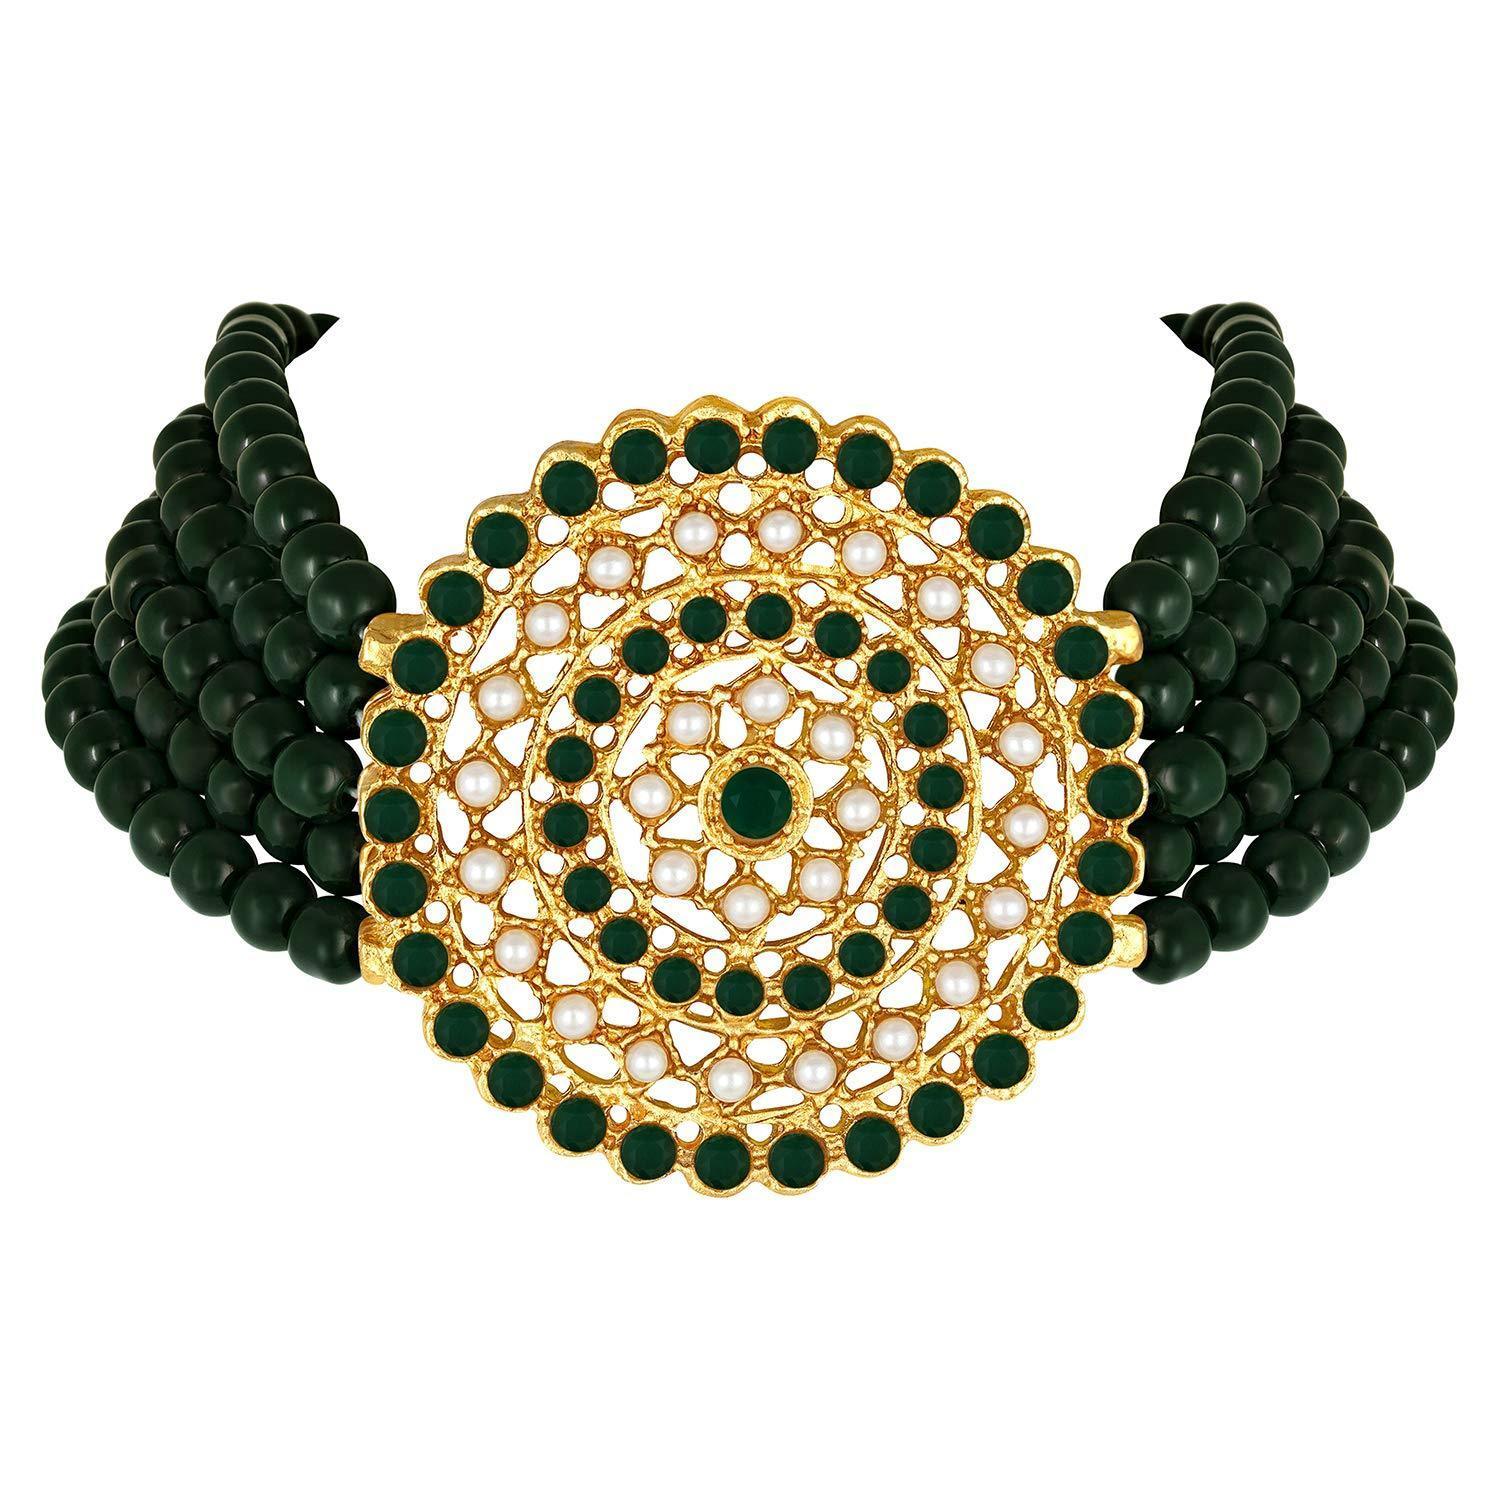 Women's Gold Plated Green Light Weight Pearl Beaded Choker Necklace Jewellery Set - i jewels